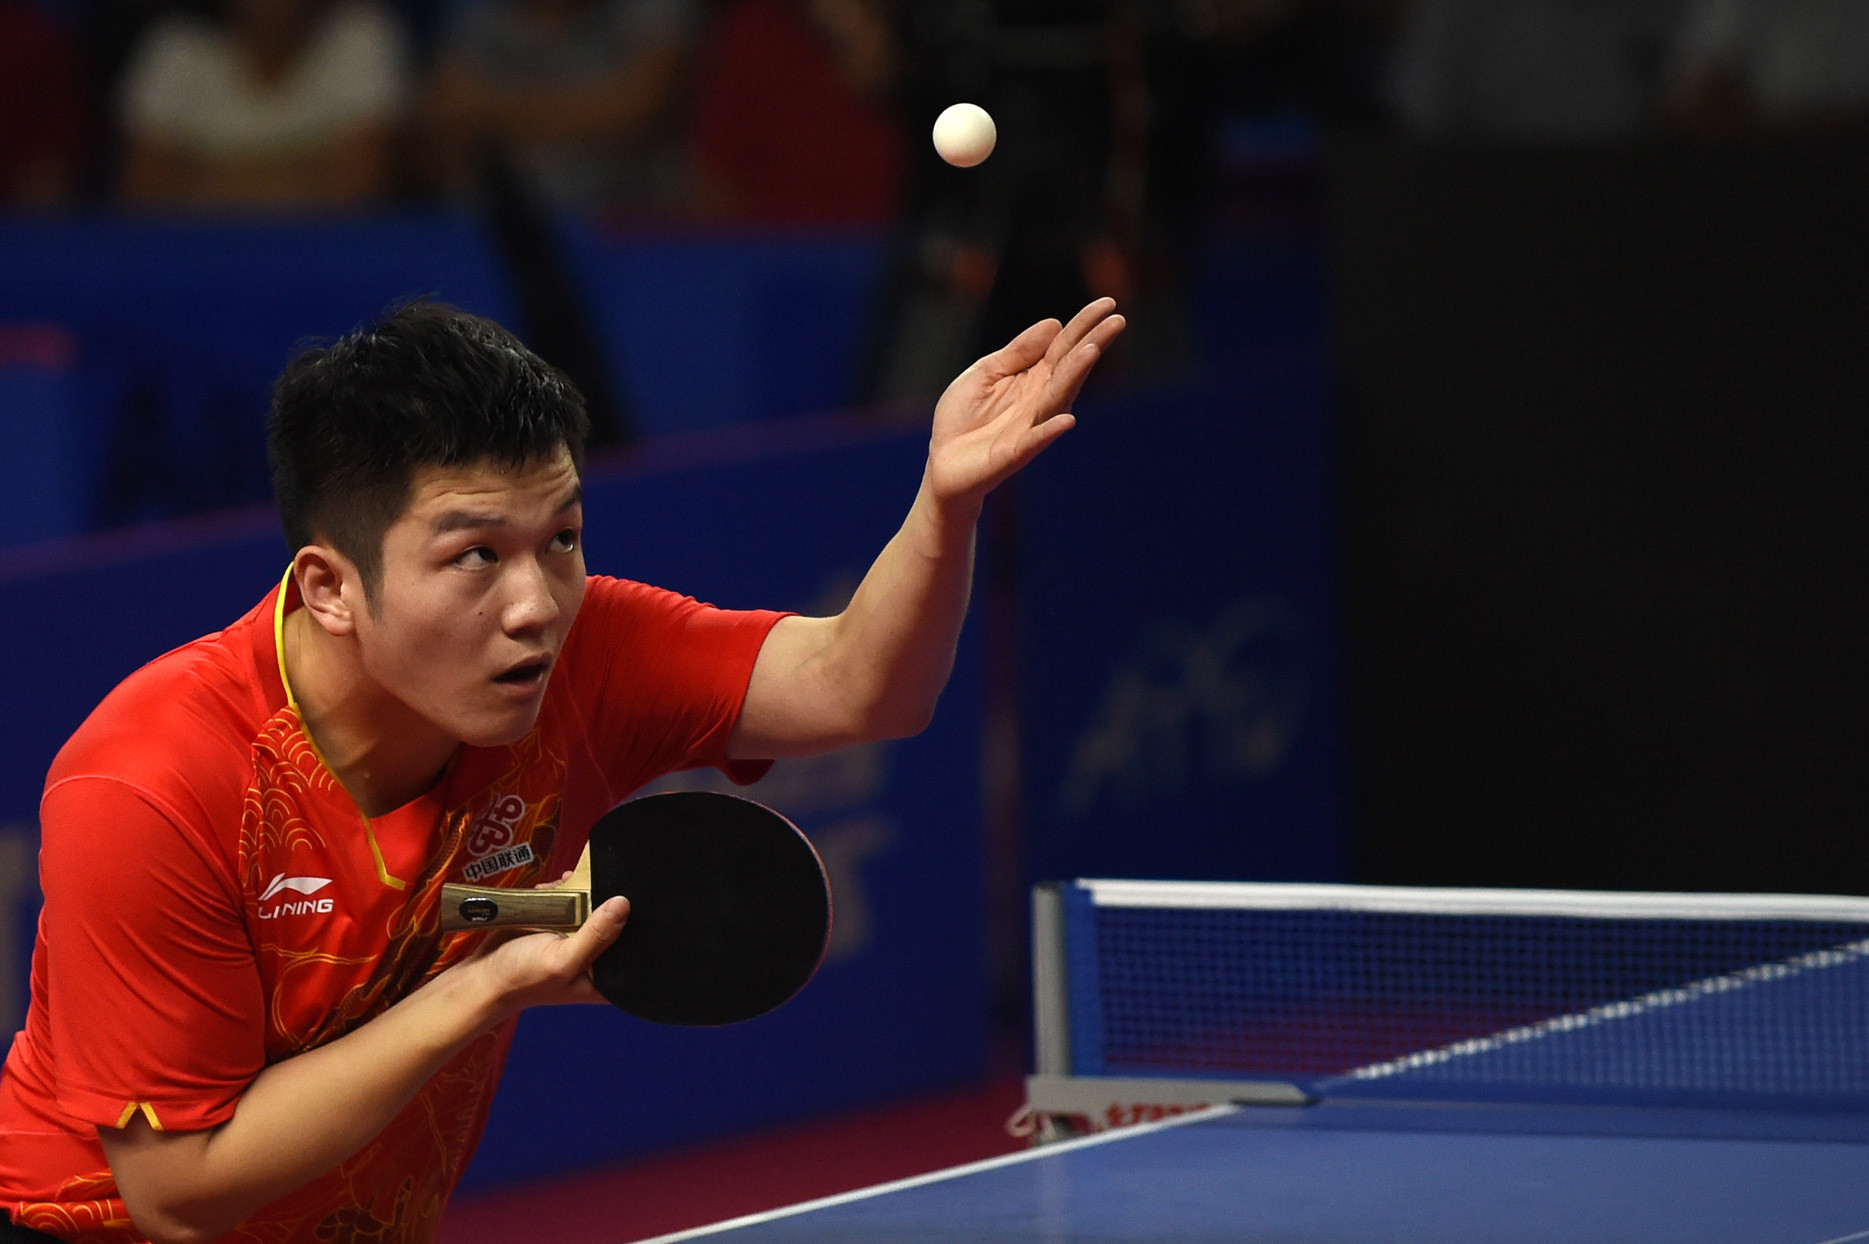 Top seed Fan Zhendong of China eased into the quarter-finals of the event in Budapest ©Getty Images